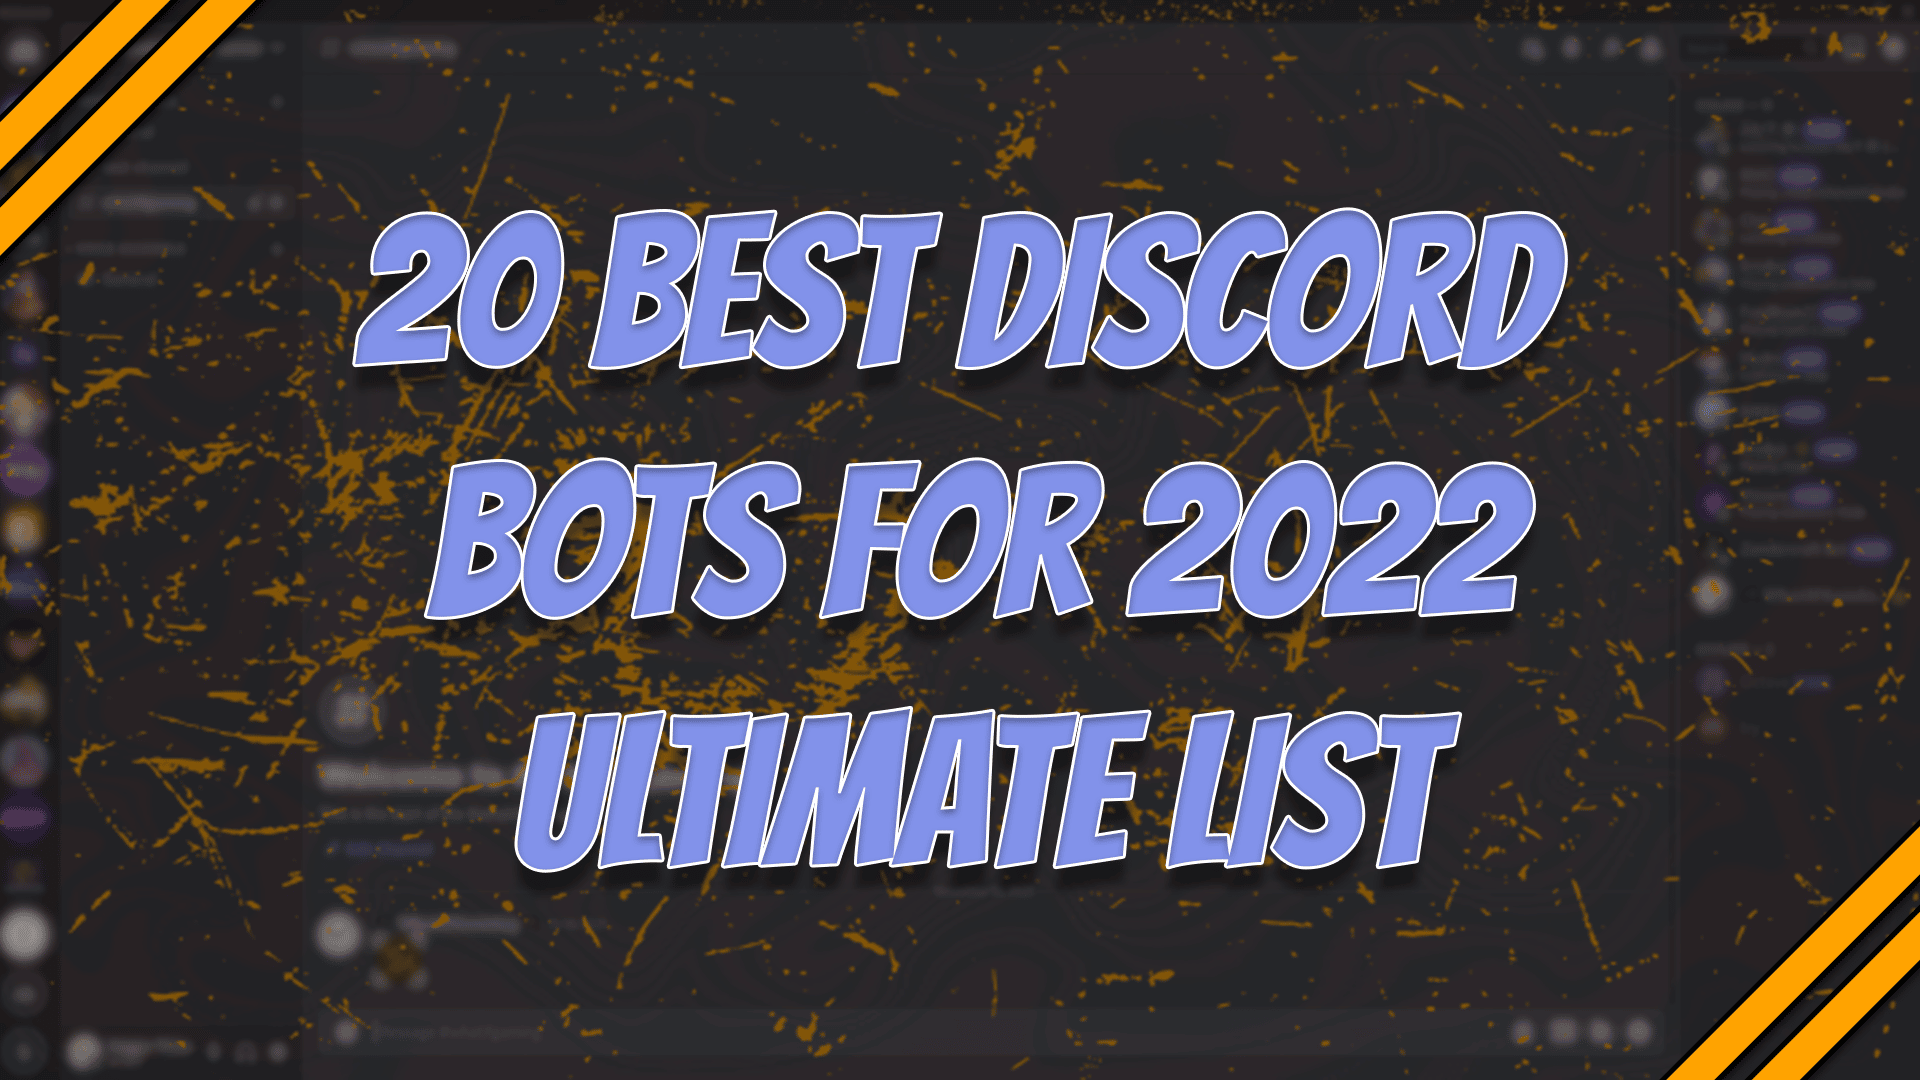 20 Best Discord Bots For 2022 - Ultimate List